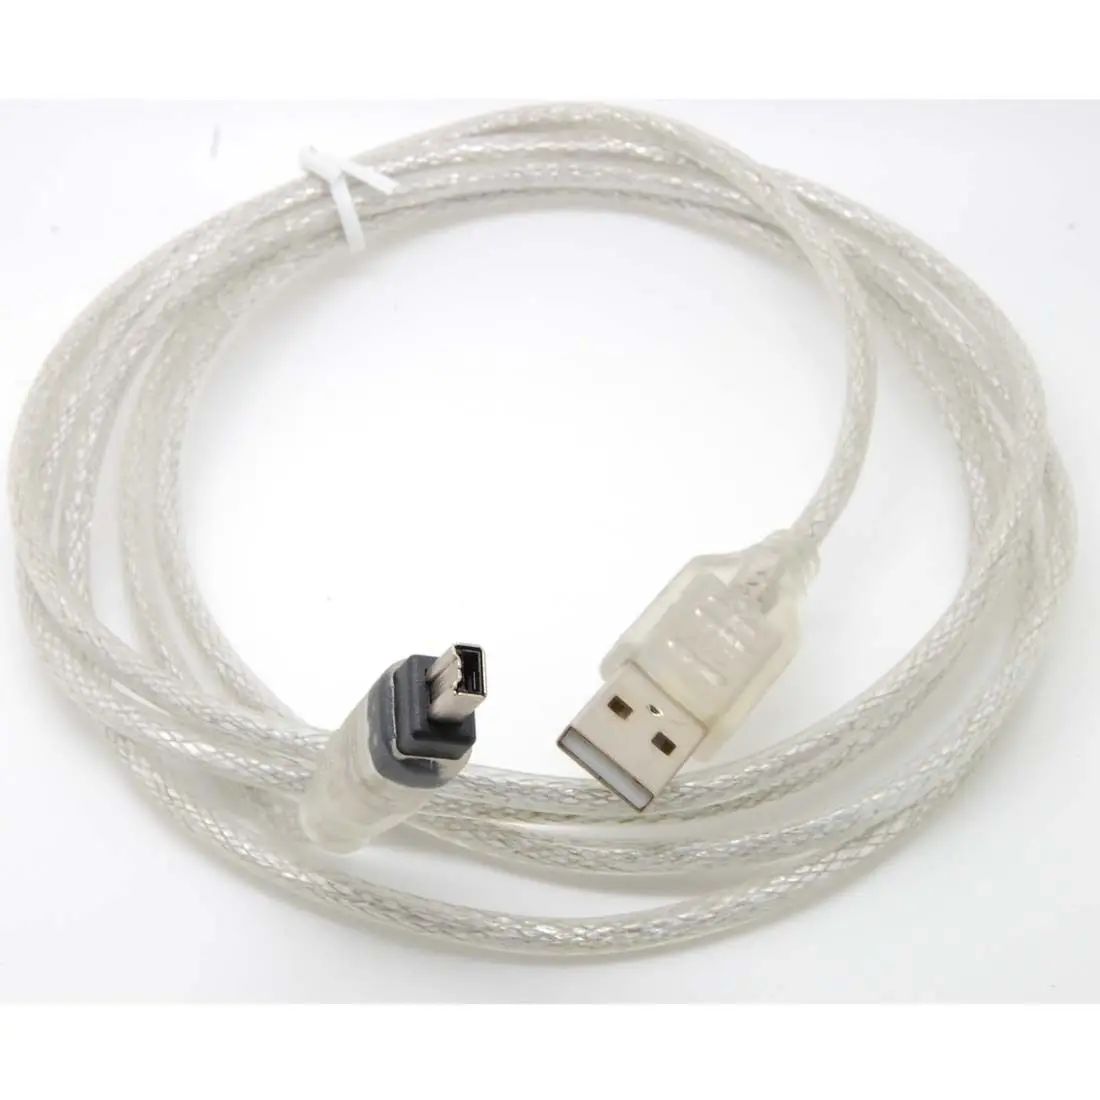 USB Male To Firewire IEEE 1394 4 Pin Male ILink Adapter Cord Firewire 1394 Cable For SONY DCR-TRV75E DV Camera Cable 1.5m